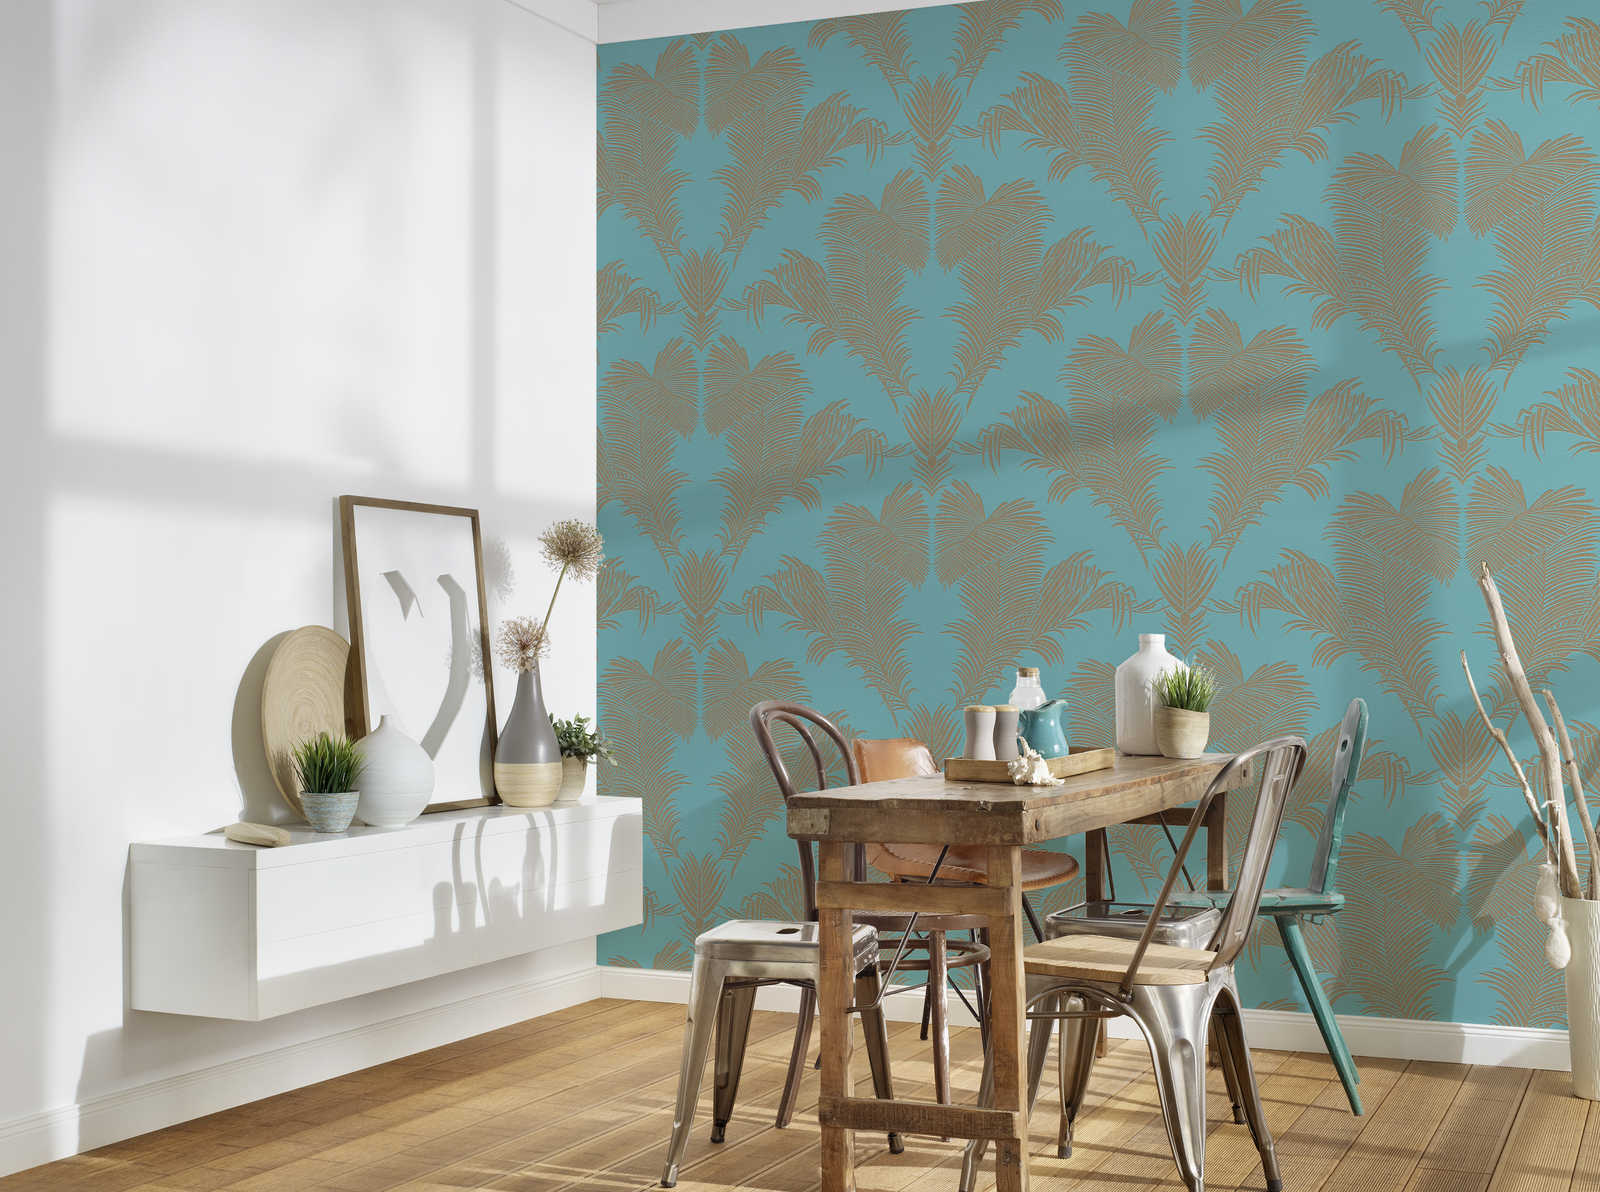             Turquoise non-woven wallpaper with leaf motif in metallic gold
        